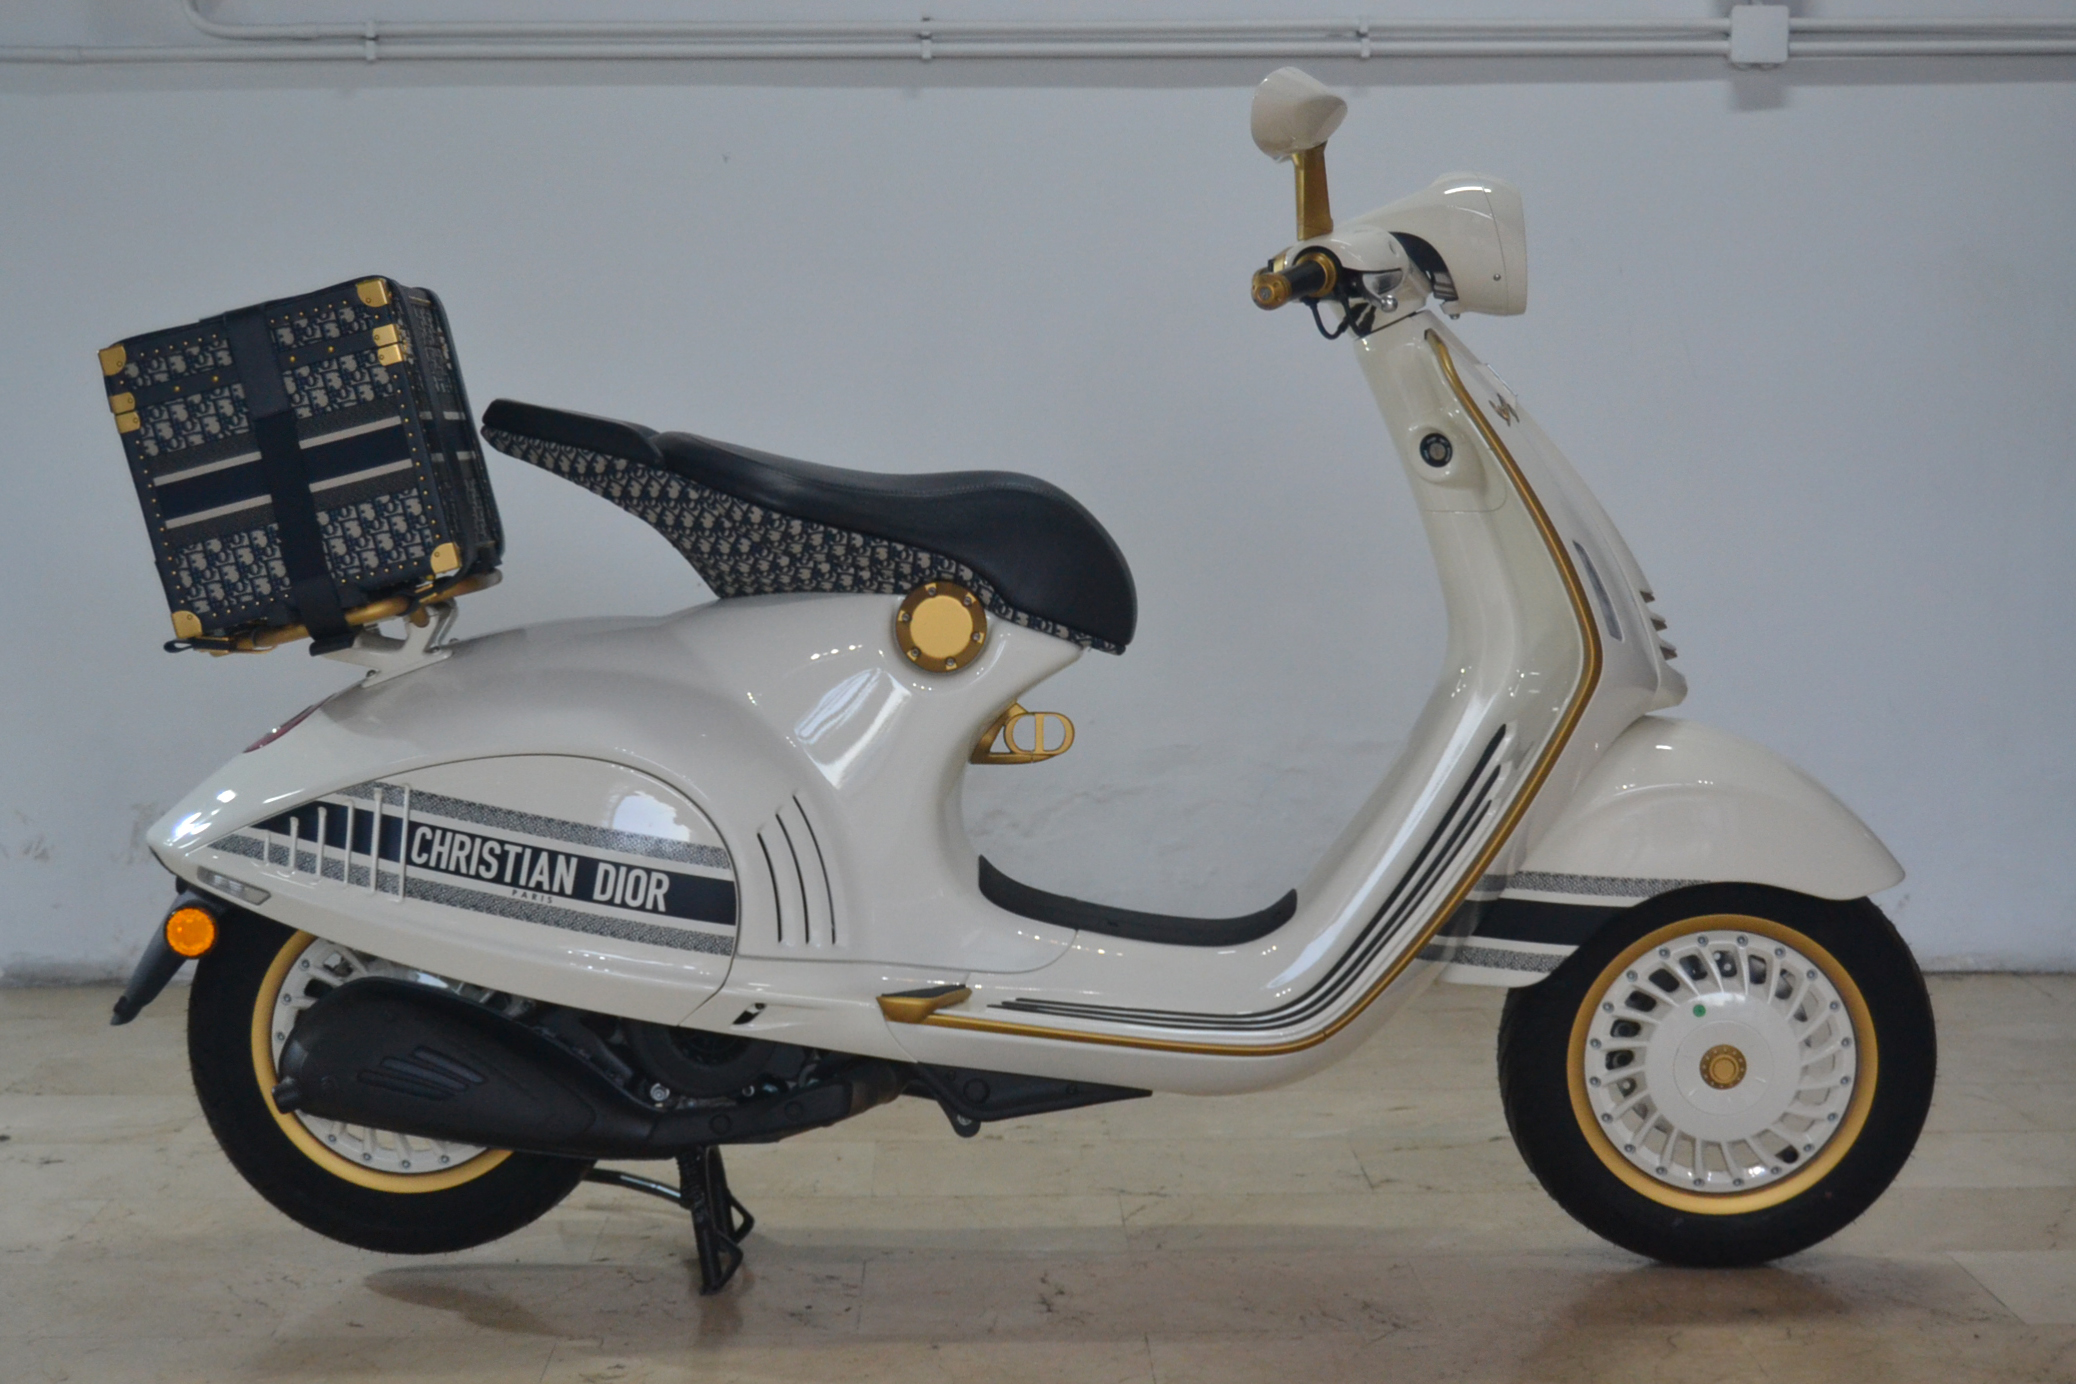 This Vespa 946 X Dior scooter is now on sale for RM1XX 000